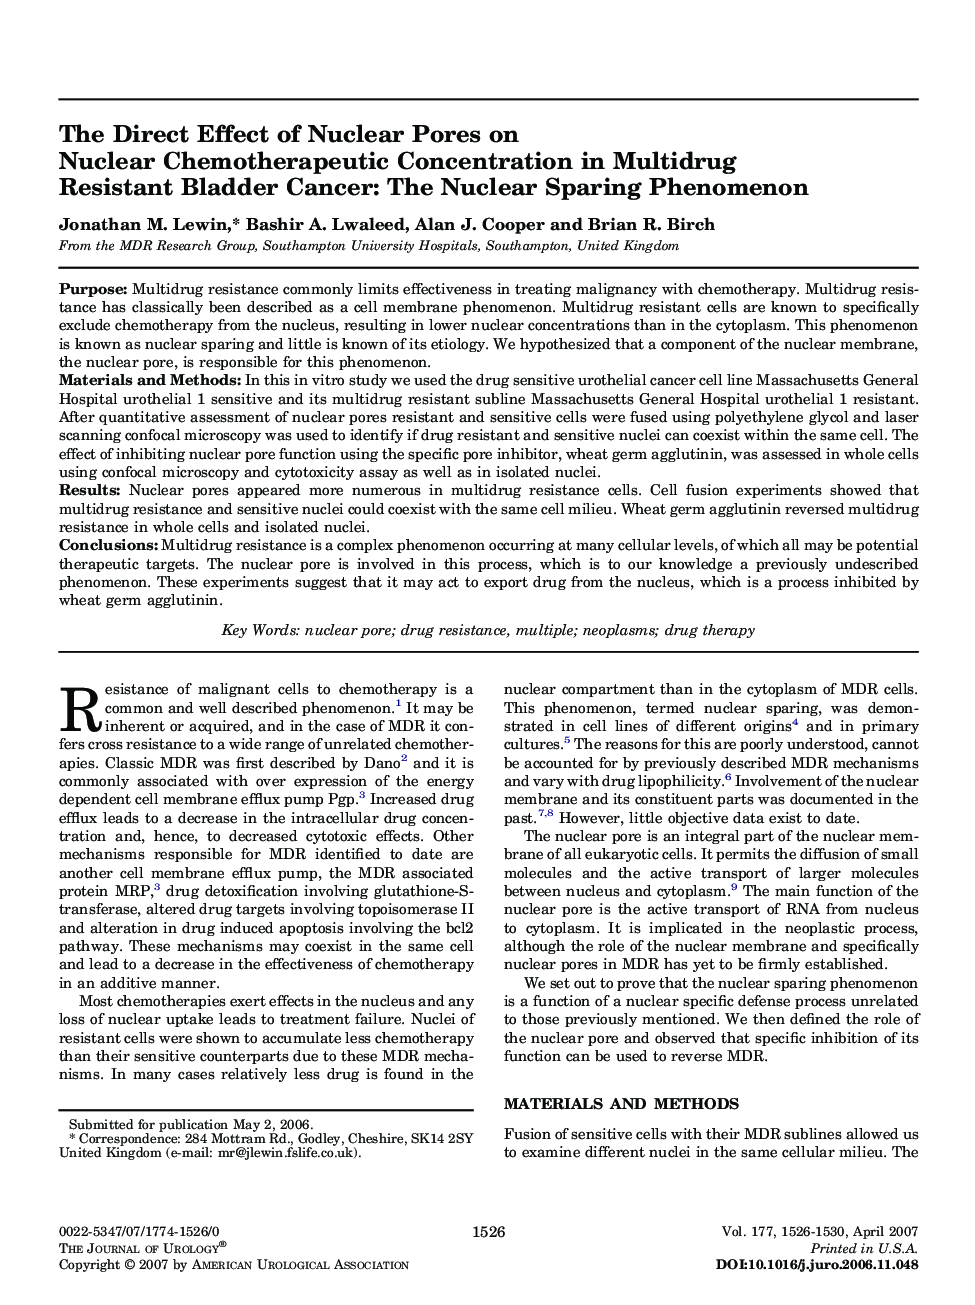 The Direct Effect of Nuclear Pores on Nuclear Chemotherapeutic Concentration in Multidrug Resistant Bladder Cancer: The Nuclear Sparing Phenomenon